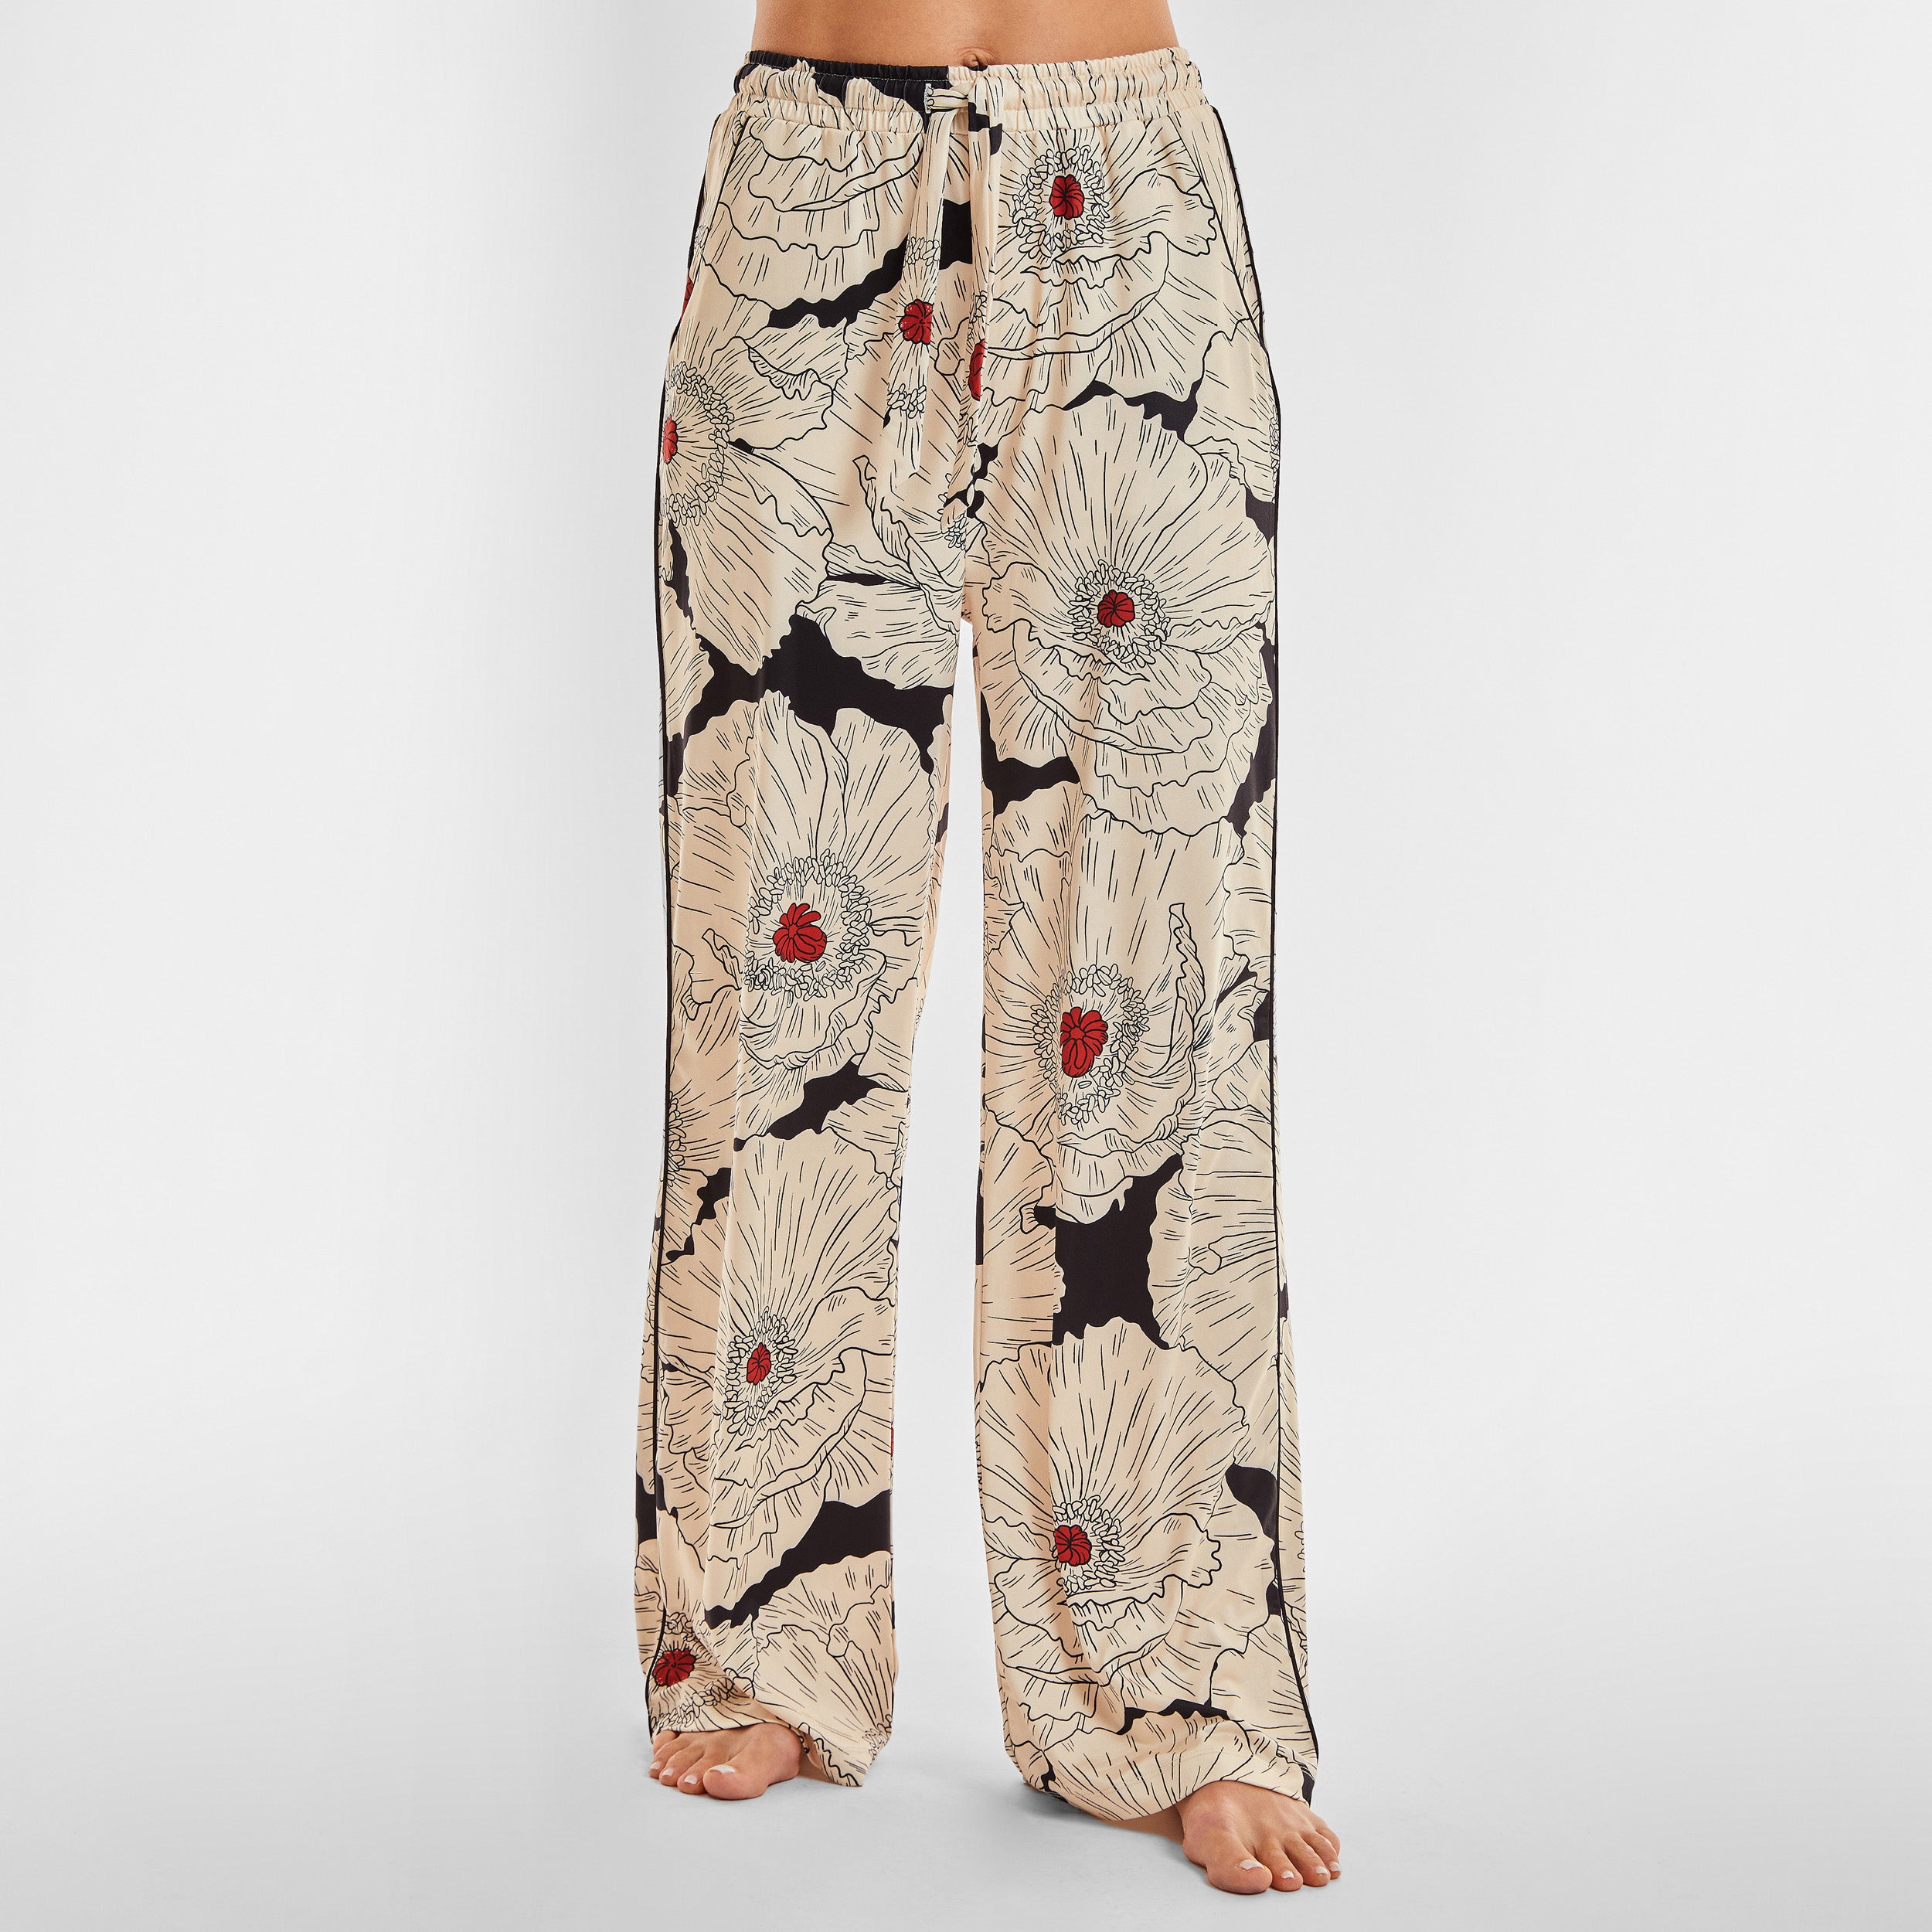 Front view of woman wearing breathable, relaxed and buttery smooth pajama pant featuring high-waist cut, side pockets, front tie and stunning Poppy floral print.